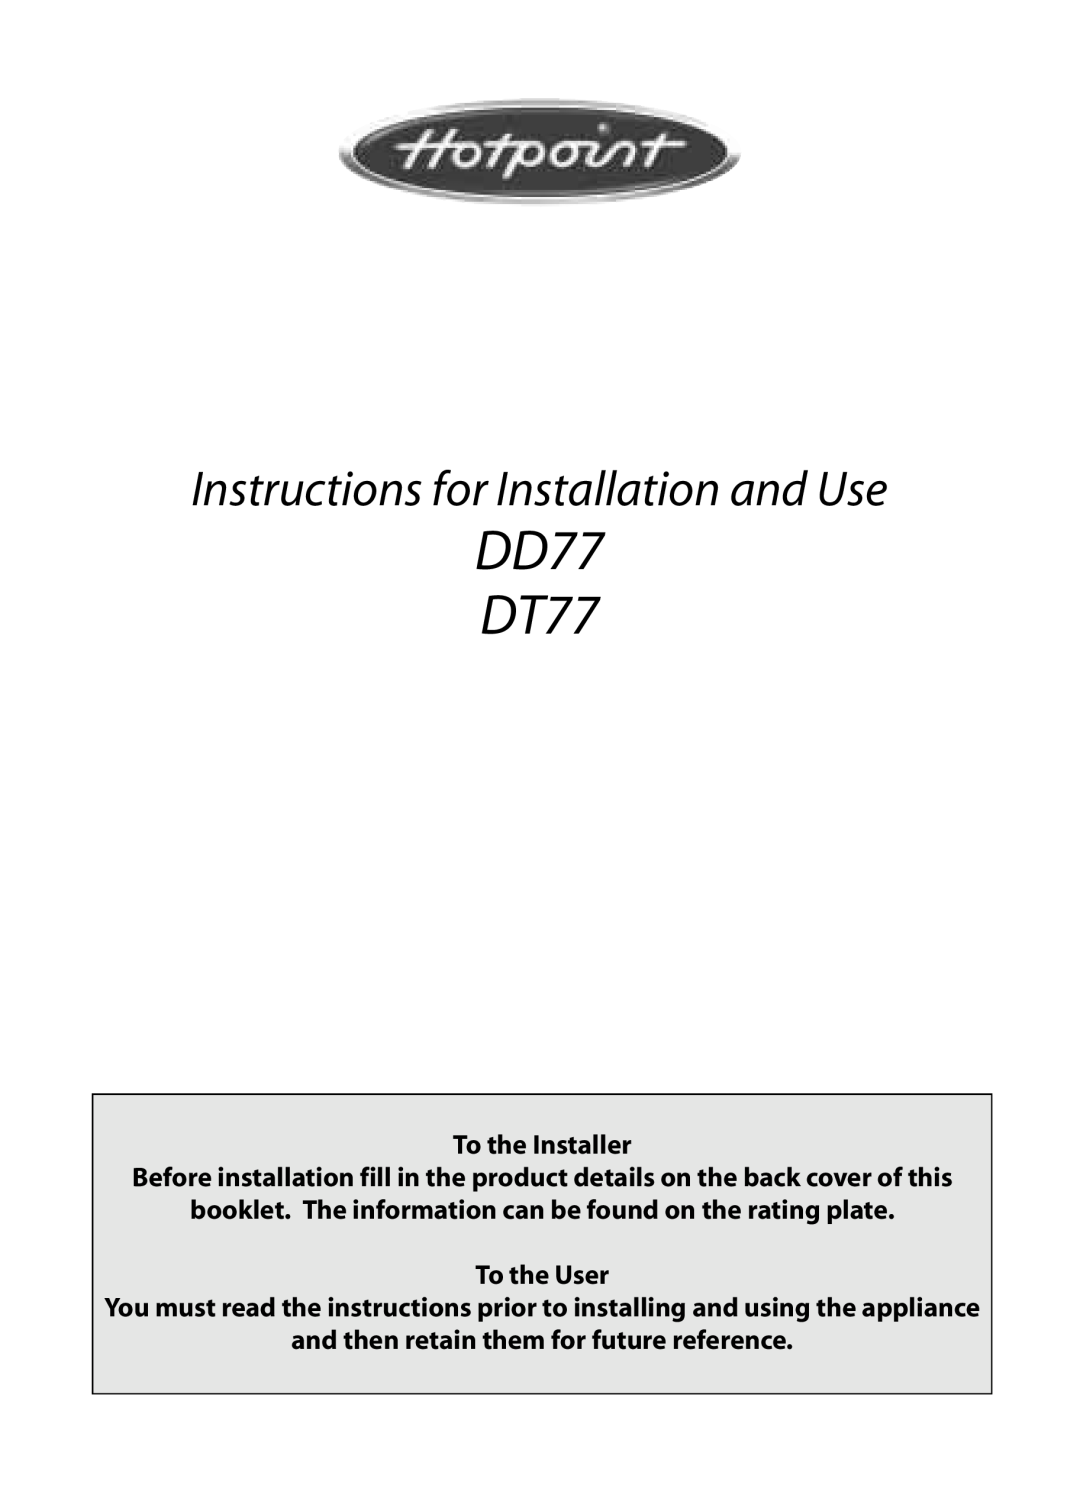 Hotpoint DD77 DT77 manual To the Installer, To the User, and then retain them for future reference 